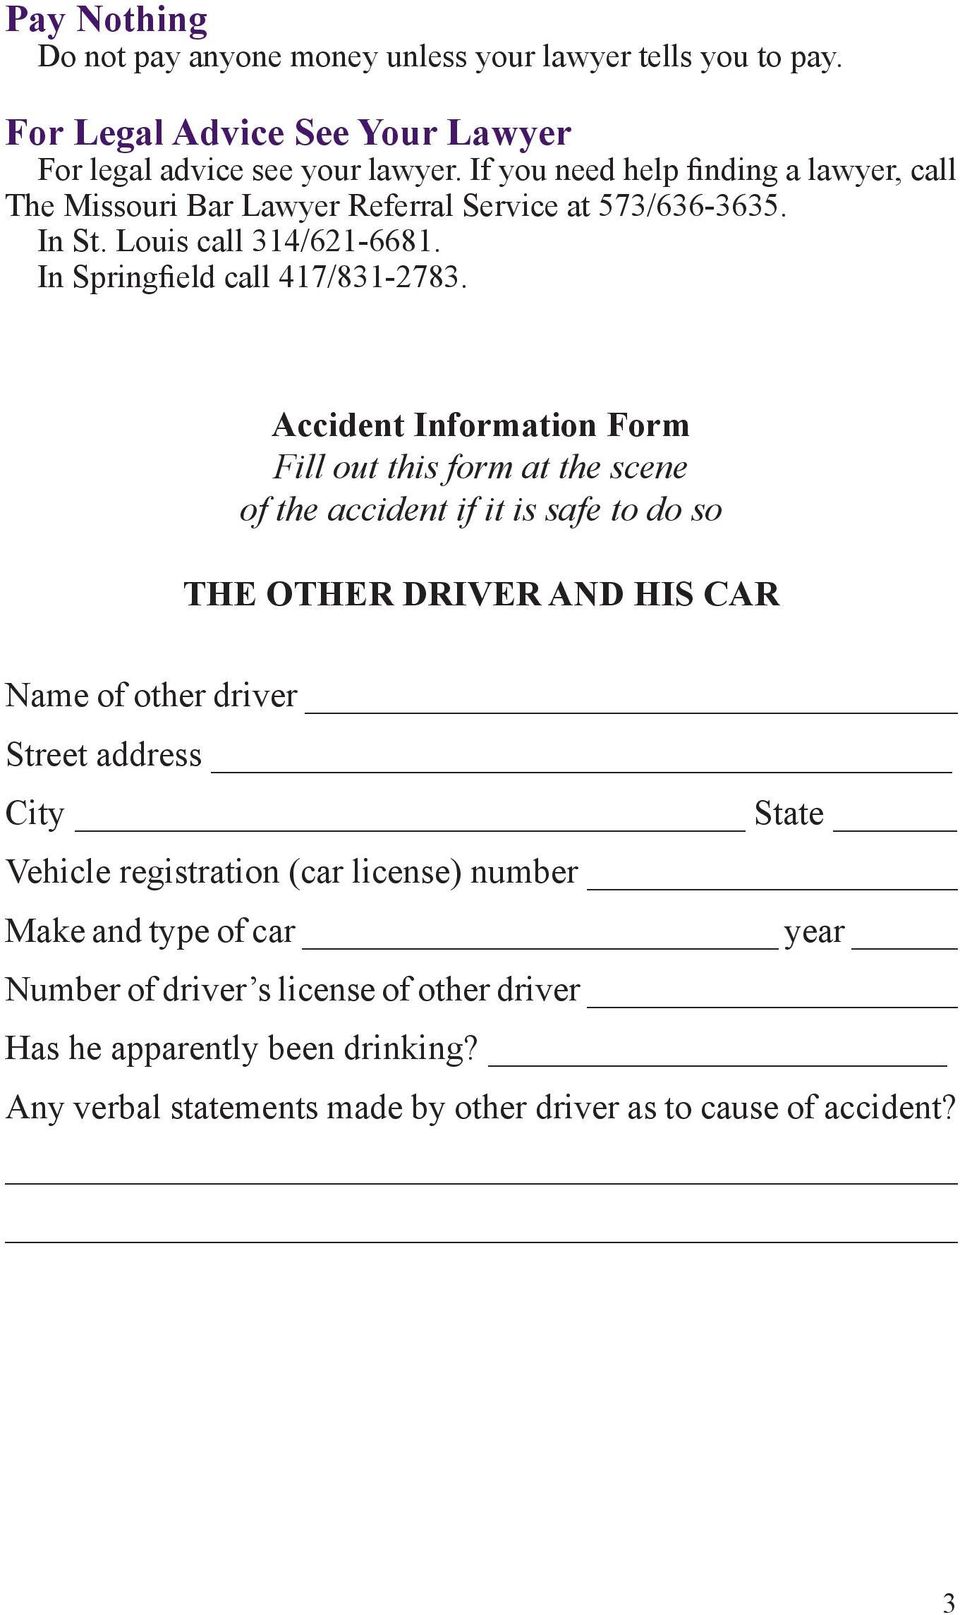 Accident Information Form Fill out this form at the scene of the accident if it is safe to do so THE OTHER DRIVER AND HIS CAR Name of other driver Street address City State